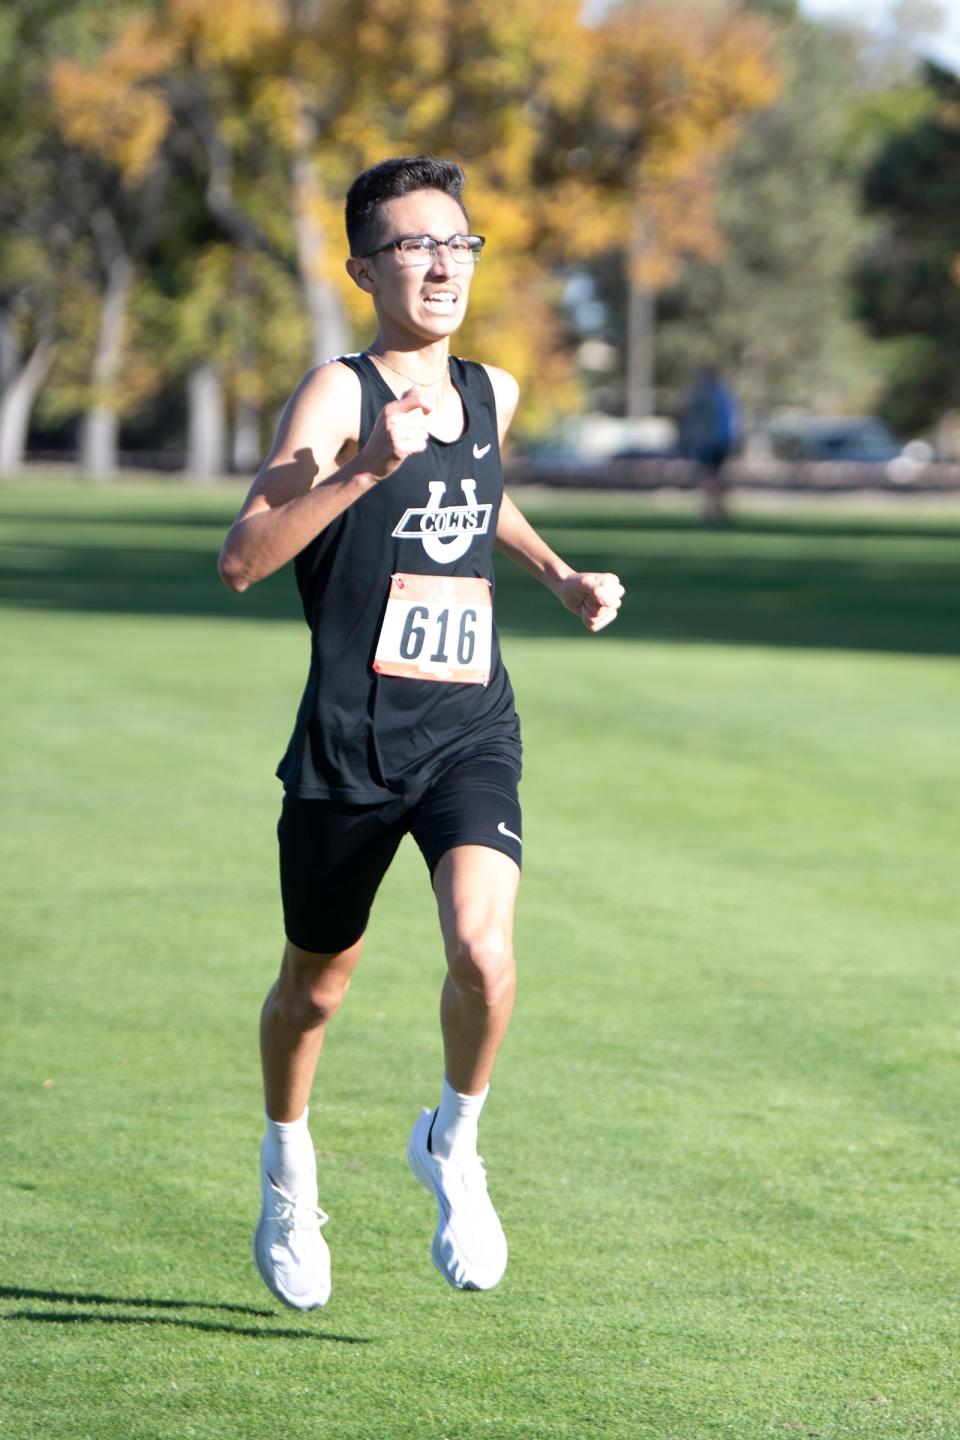 South High School's Andres Cura heads to the finish line at the Class 4A region 5 cross-country meet at Elmwood Golf Course on Thursday, Oct. 21, 2021.